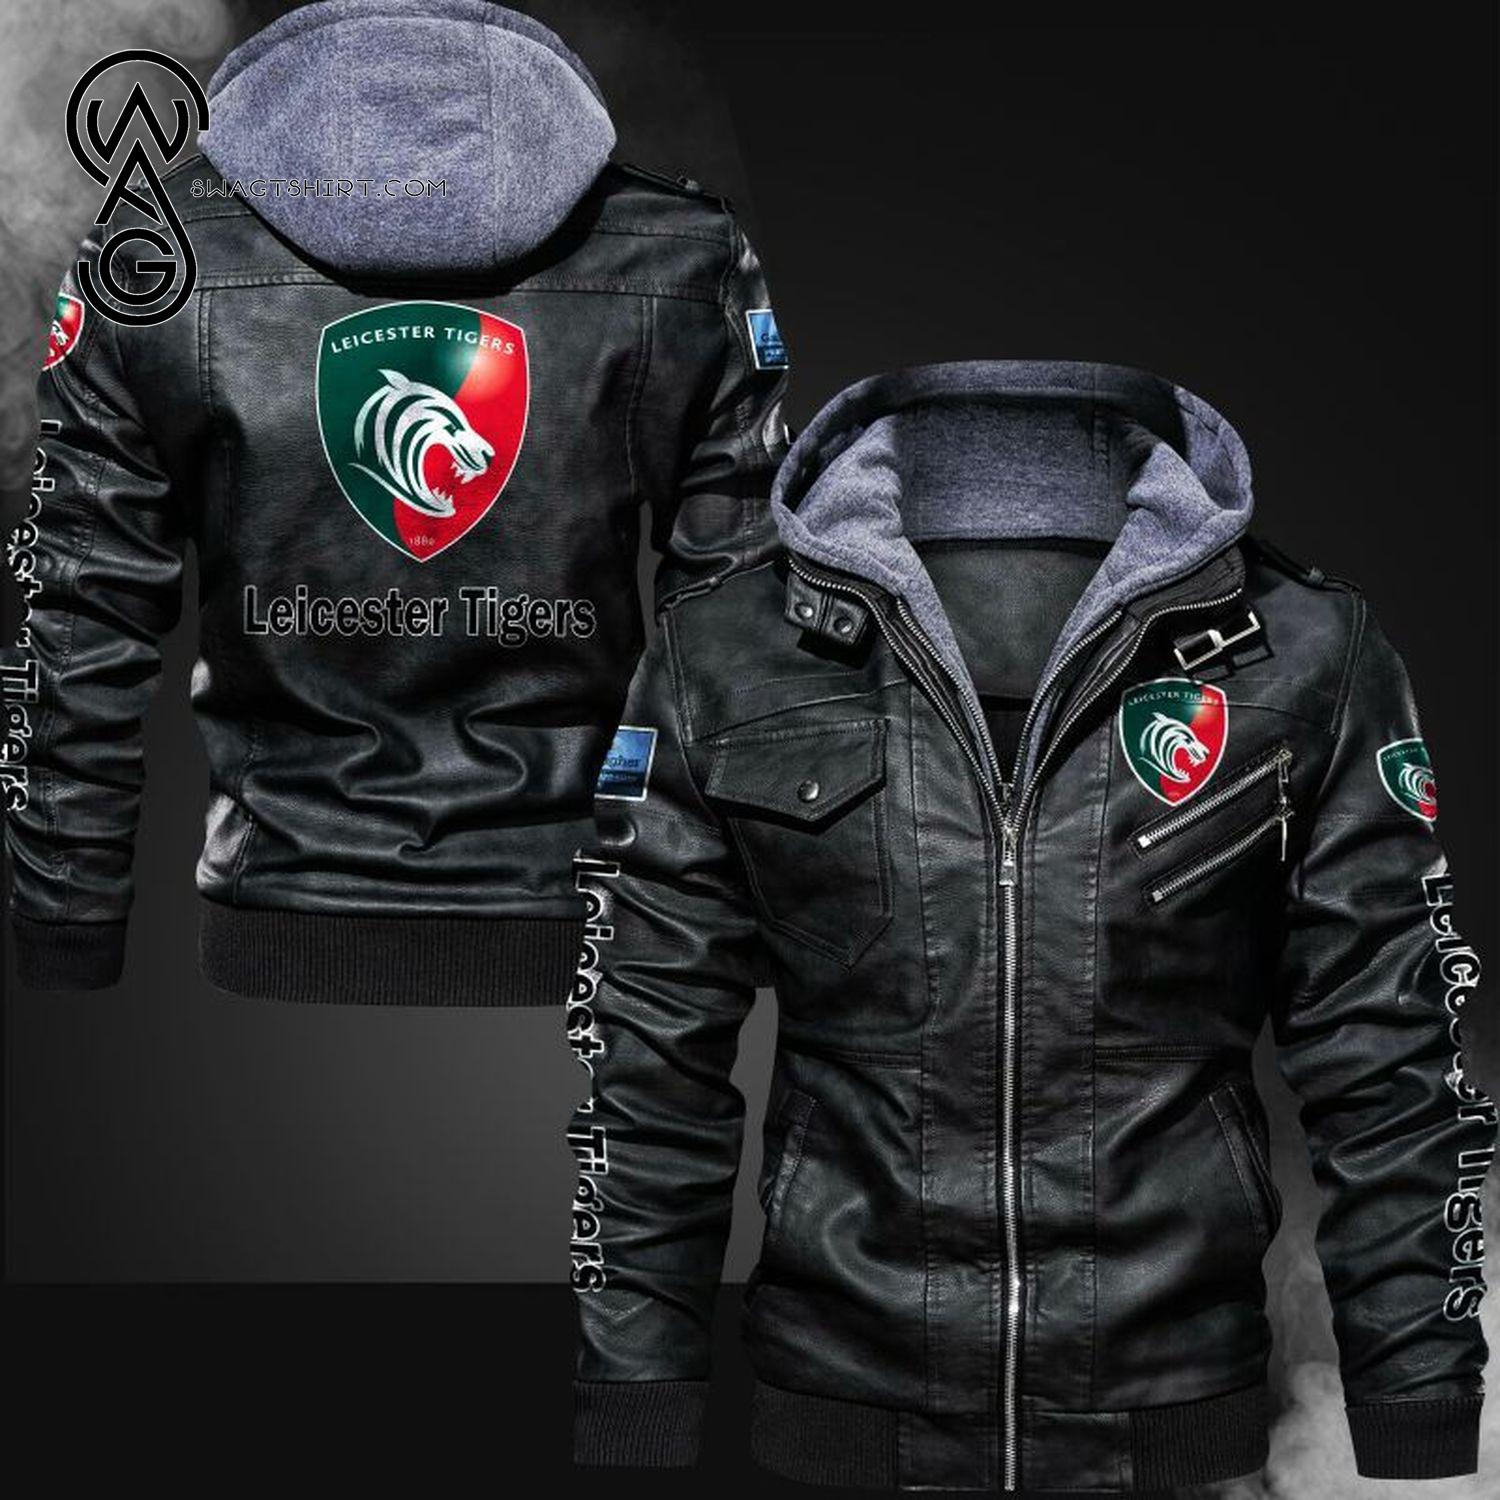 Leicester Tigers Football Club Leather Jacket